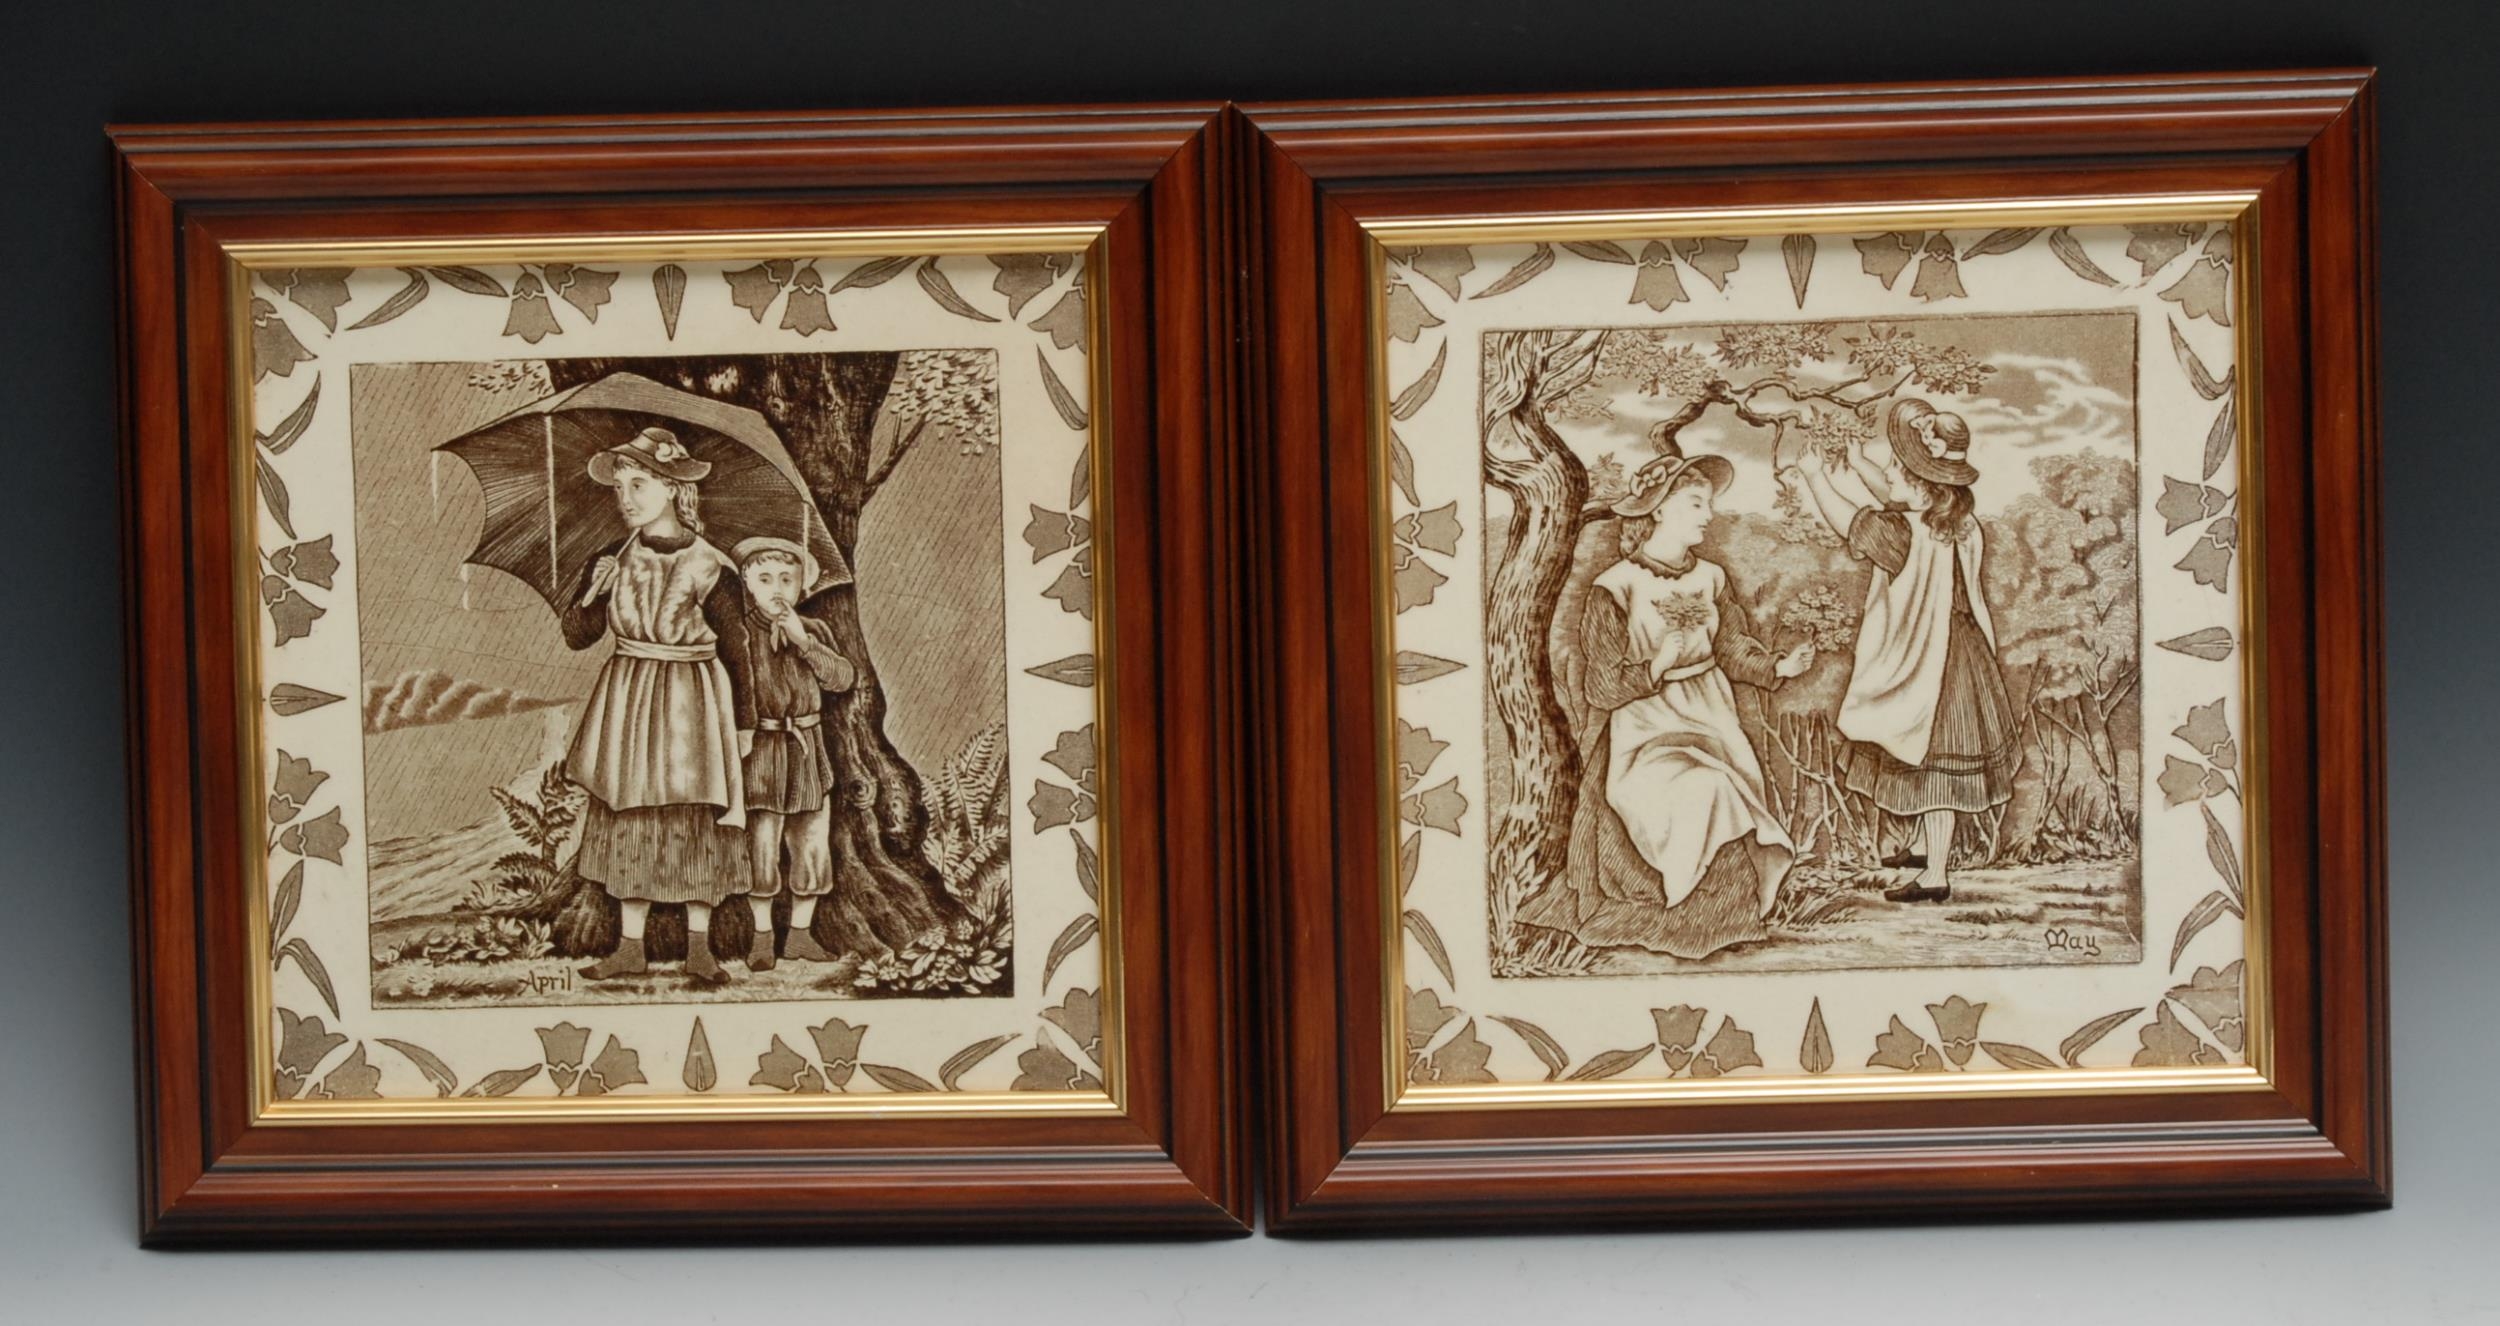 Eight Wedgwood Months tiles designed by Helen J Miles, printed in sepia on a cream ground, - Image 2 of 8